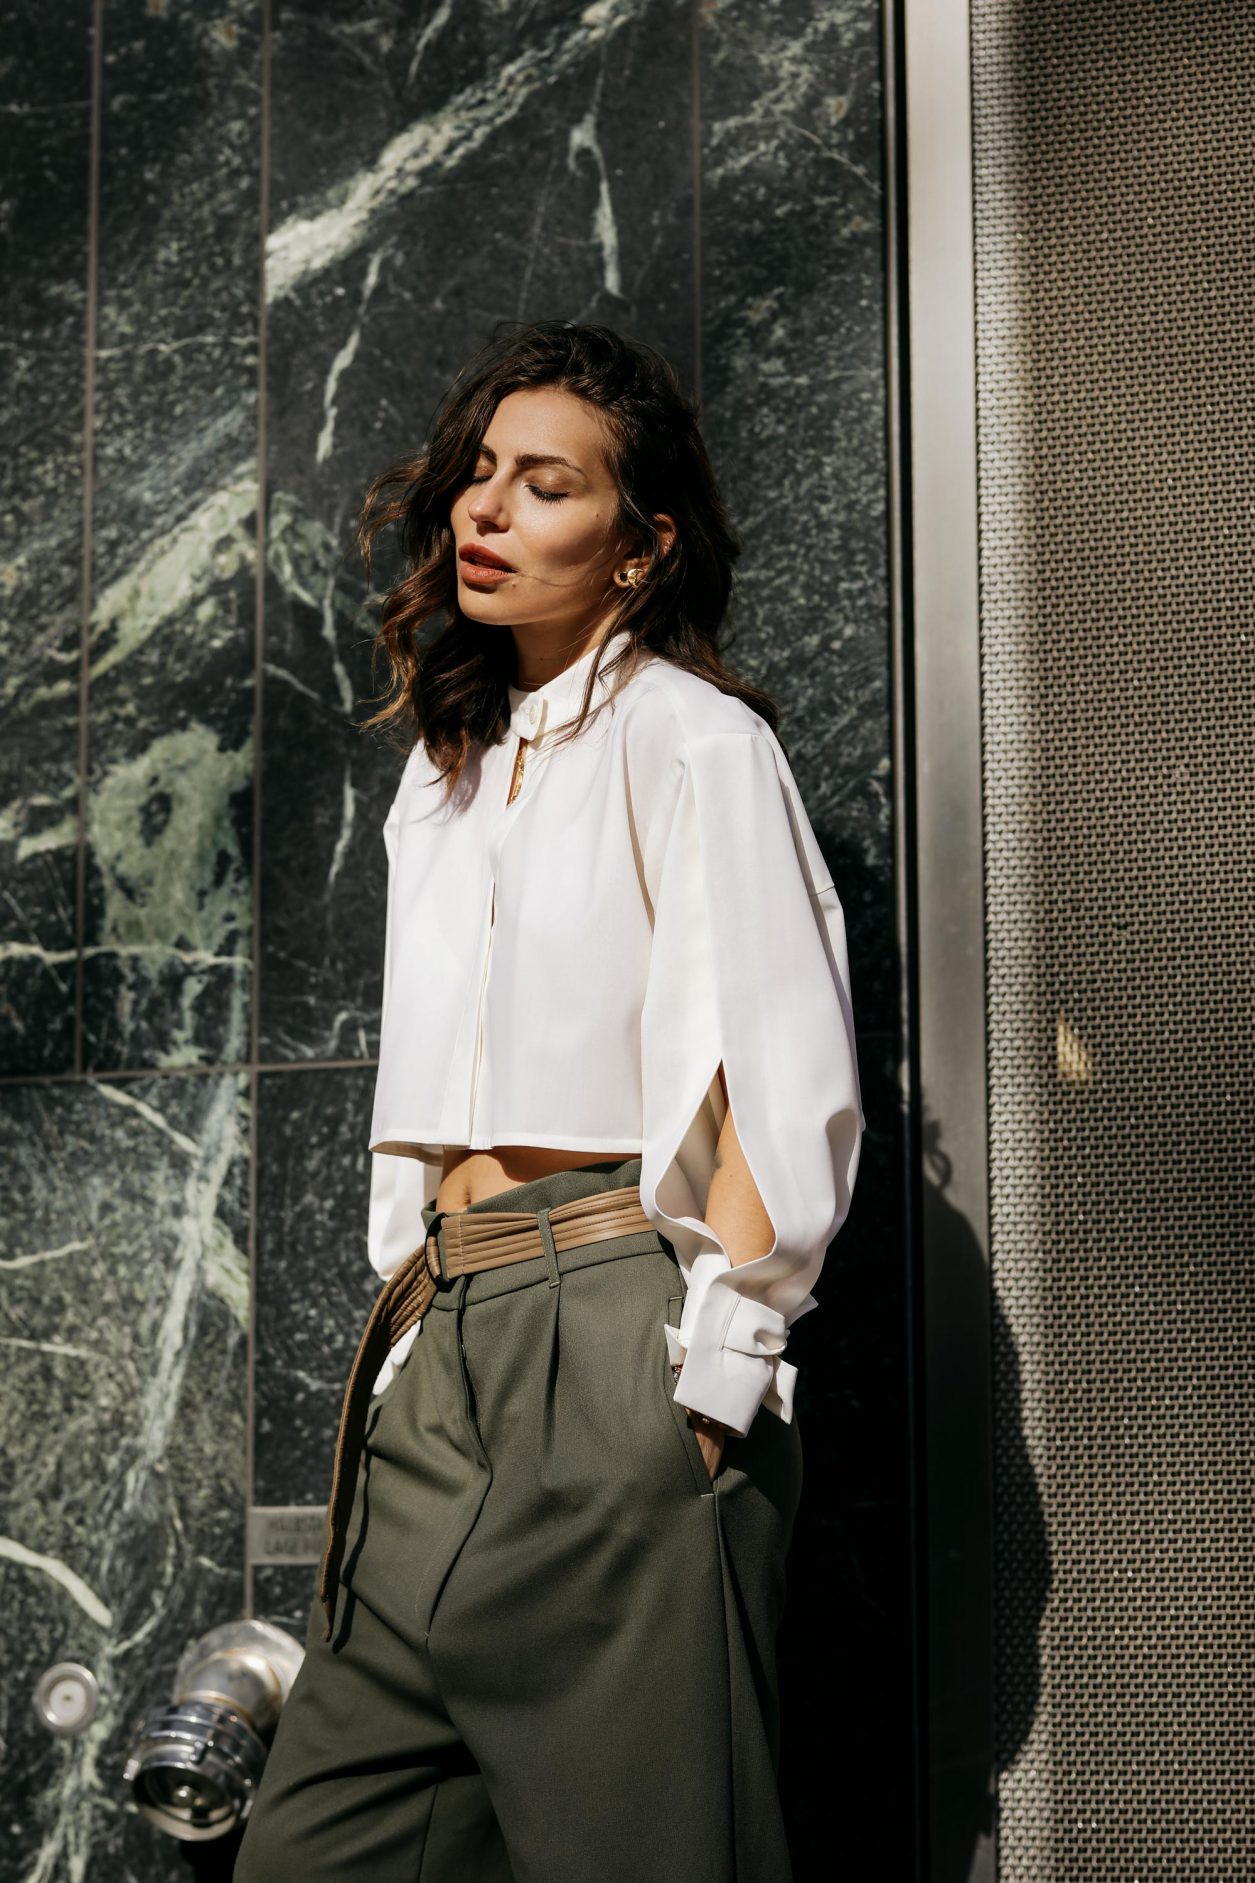 Anzeige | Streetstyle by Masha Sedgwick, photos: Jeremy Moeller | Spring summer fashion trends, everyday outfit inspiration, military chick city look: wearing khaki boyfriend pants by Munthe, white cropped Nobi Talai blouse